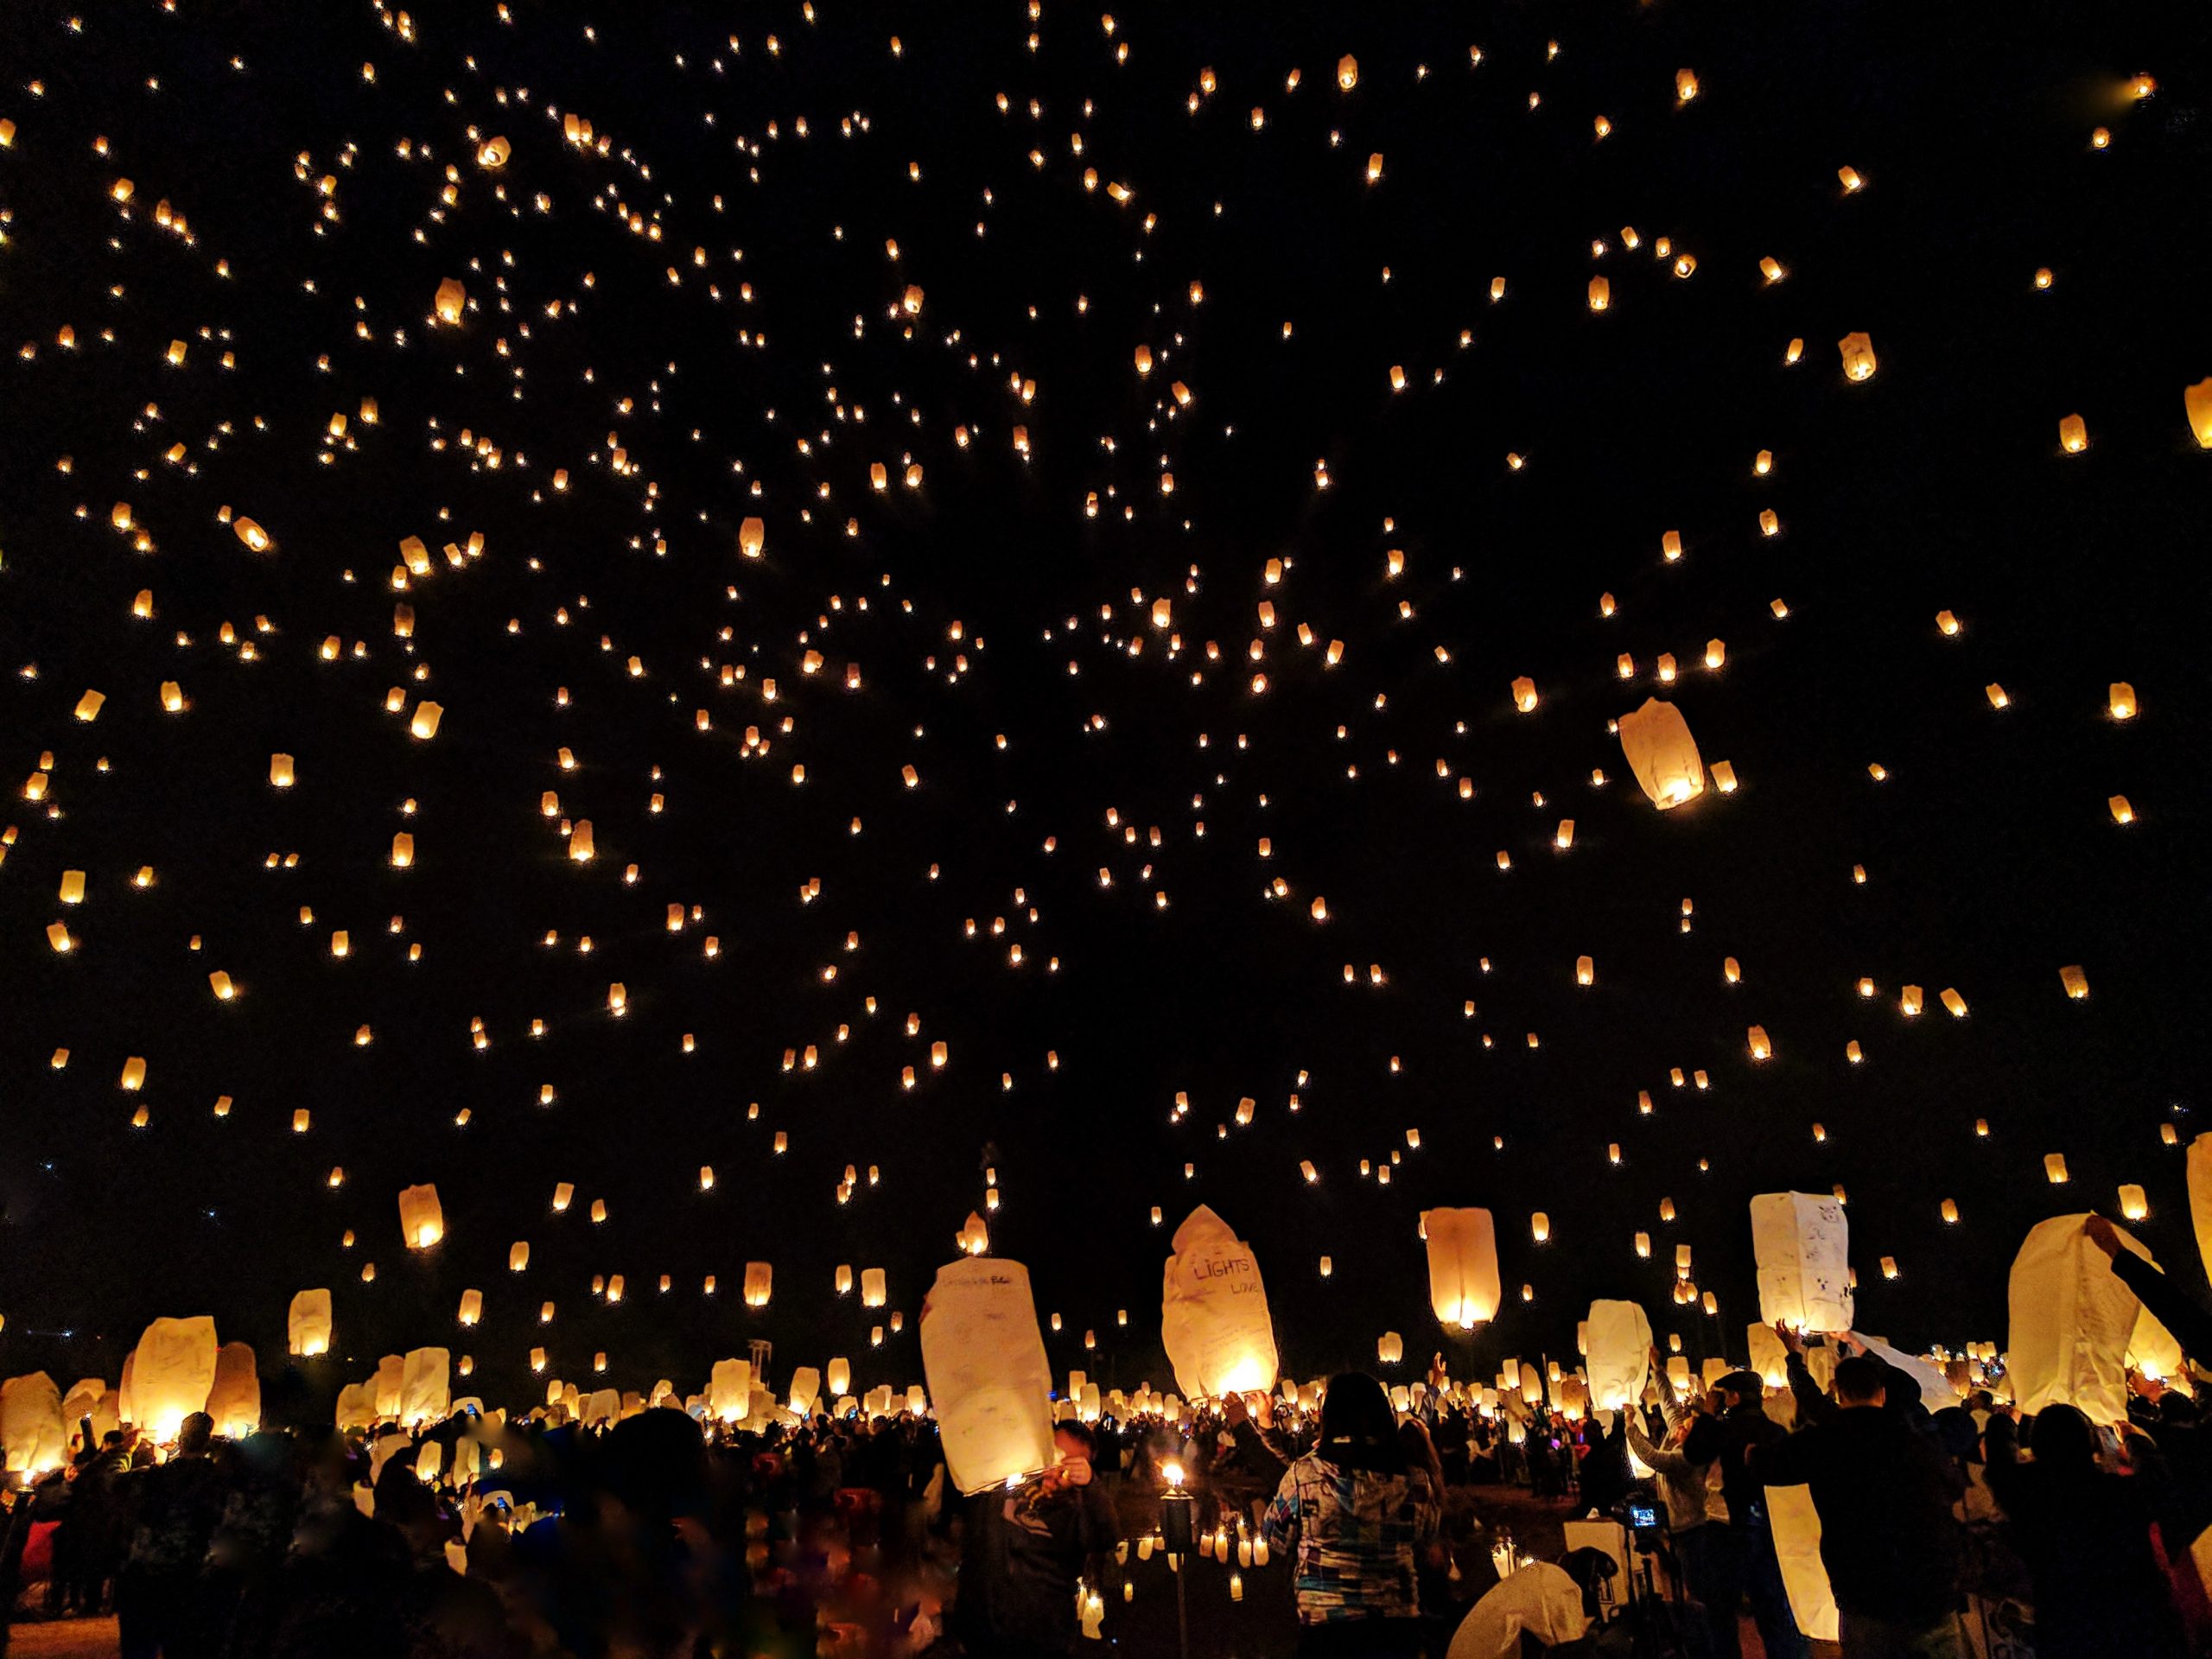 Hundreds of sky lanterns released into the night as part of the Festival of Lights